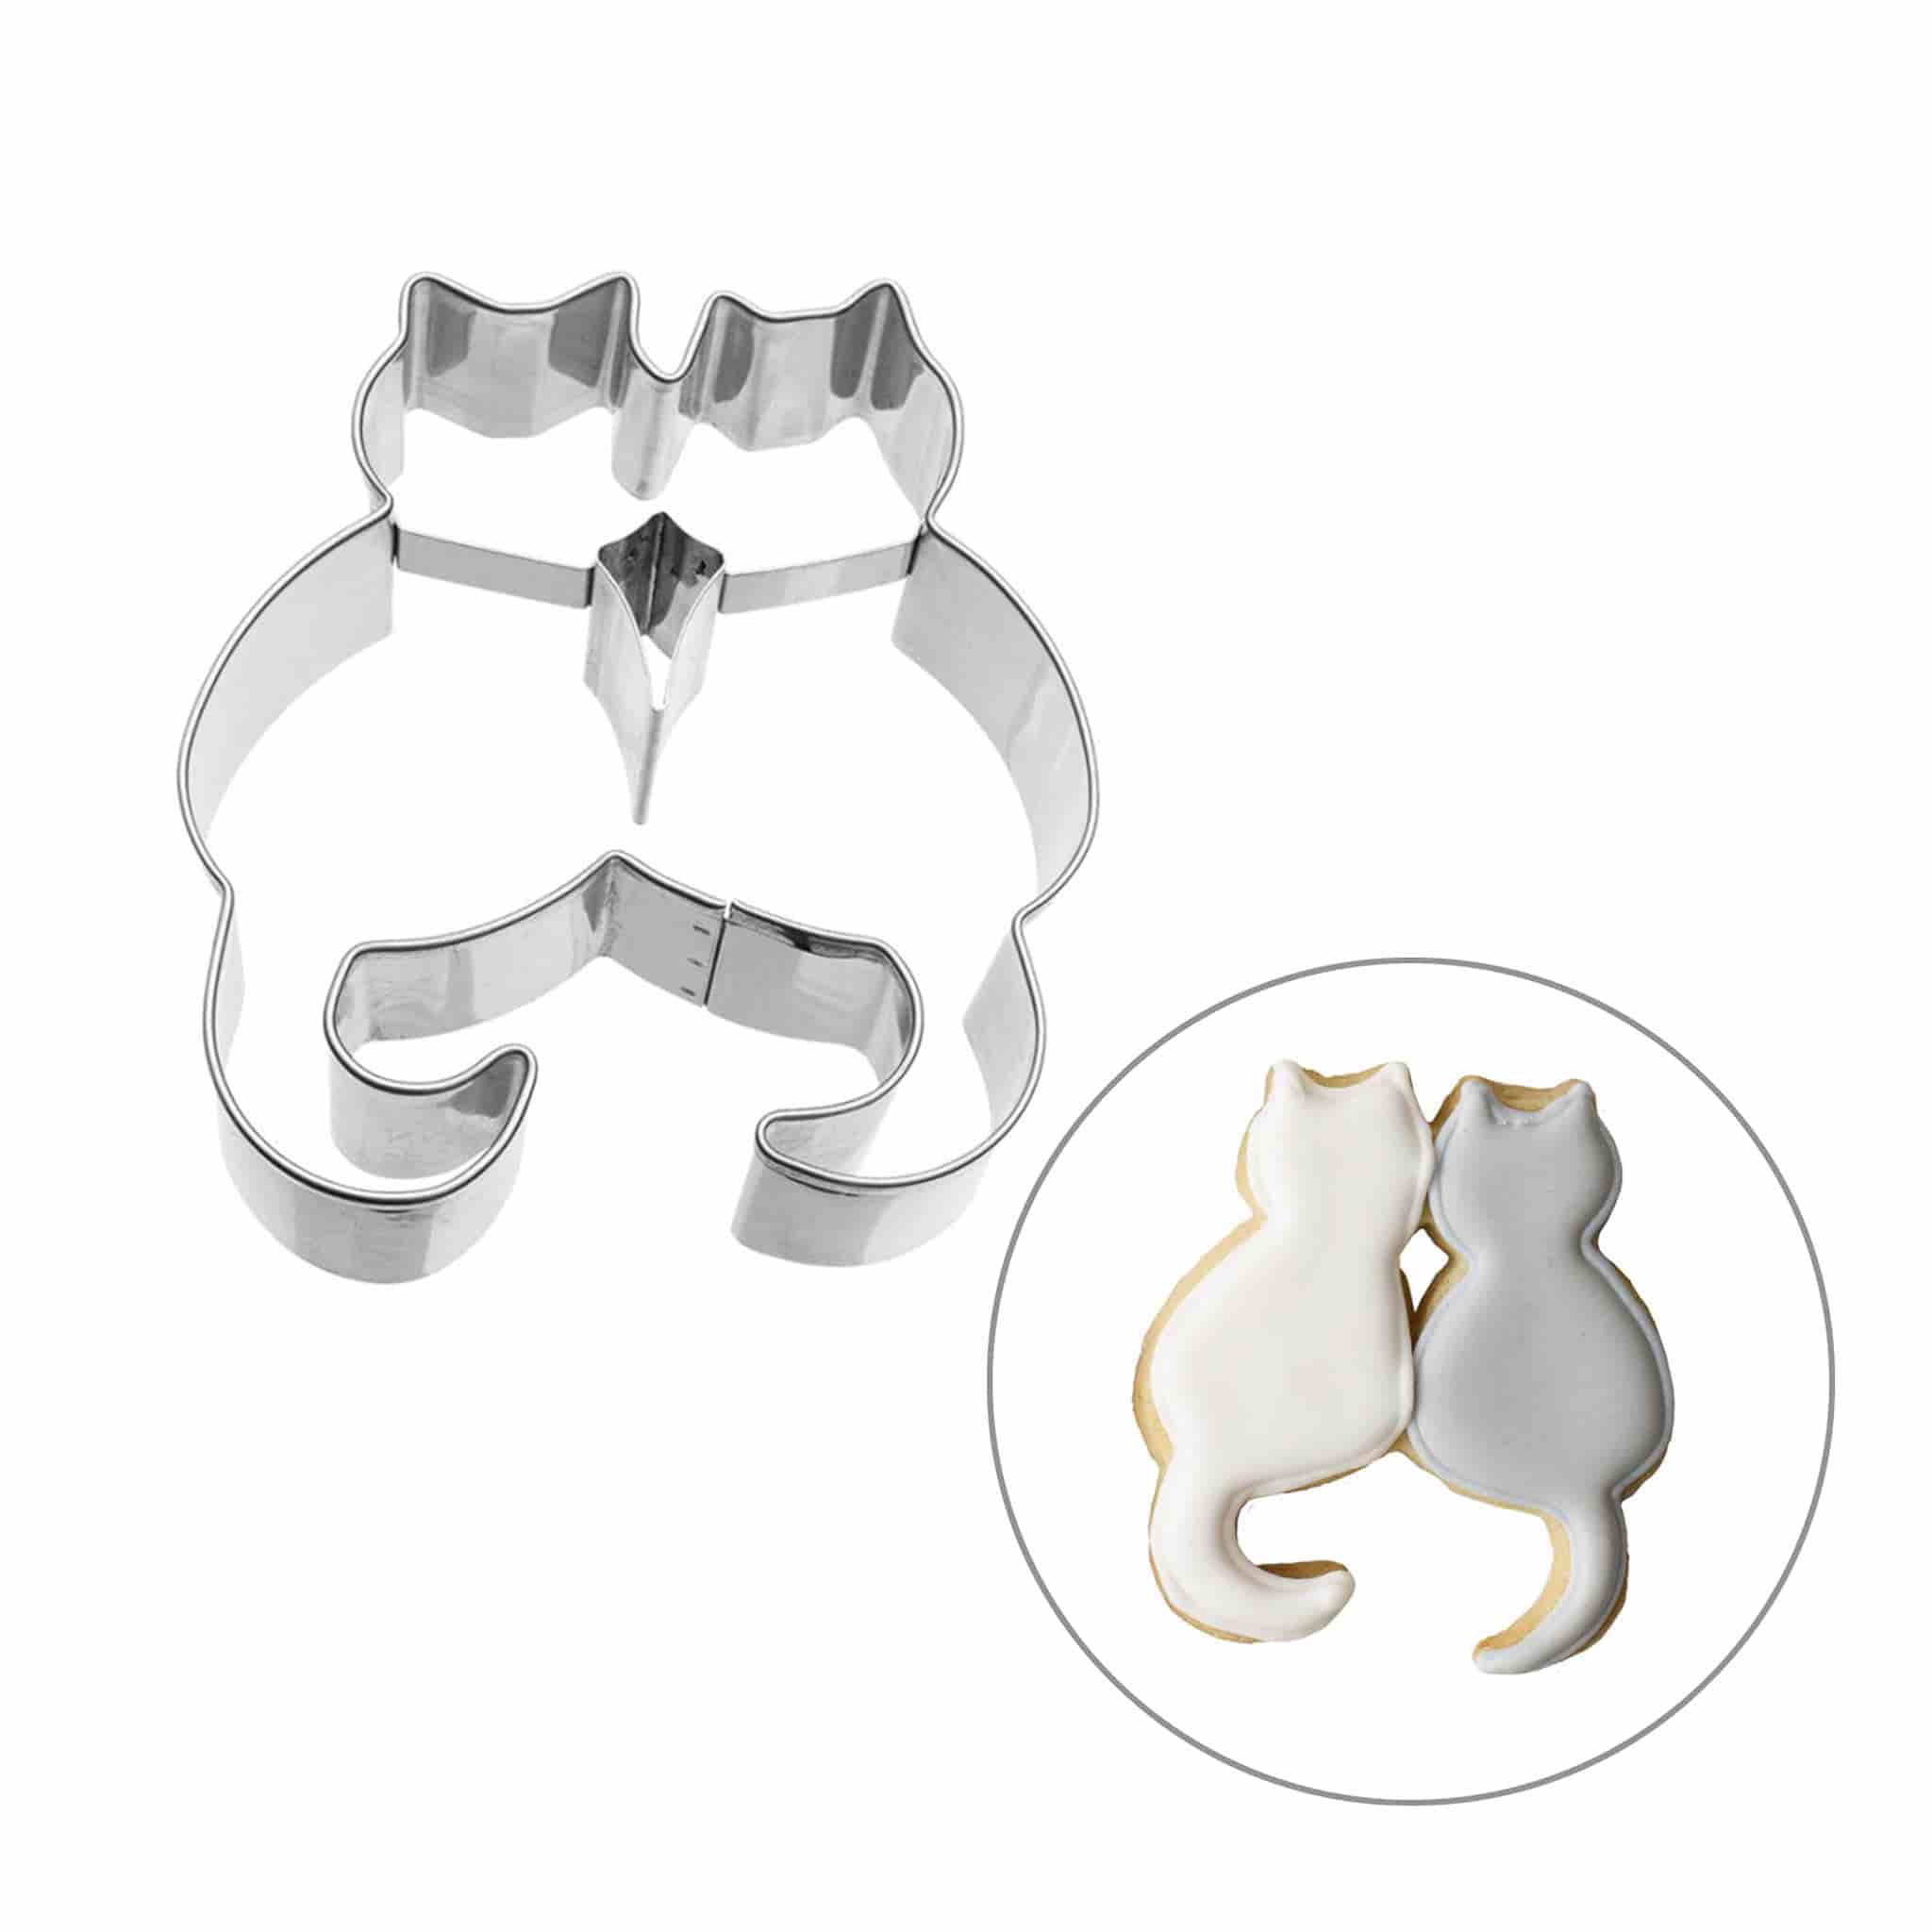 Stainless Steel Pair of Cats Cookie Cutter, 8cm